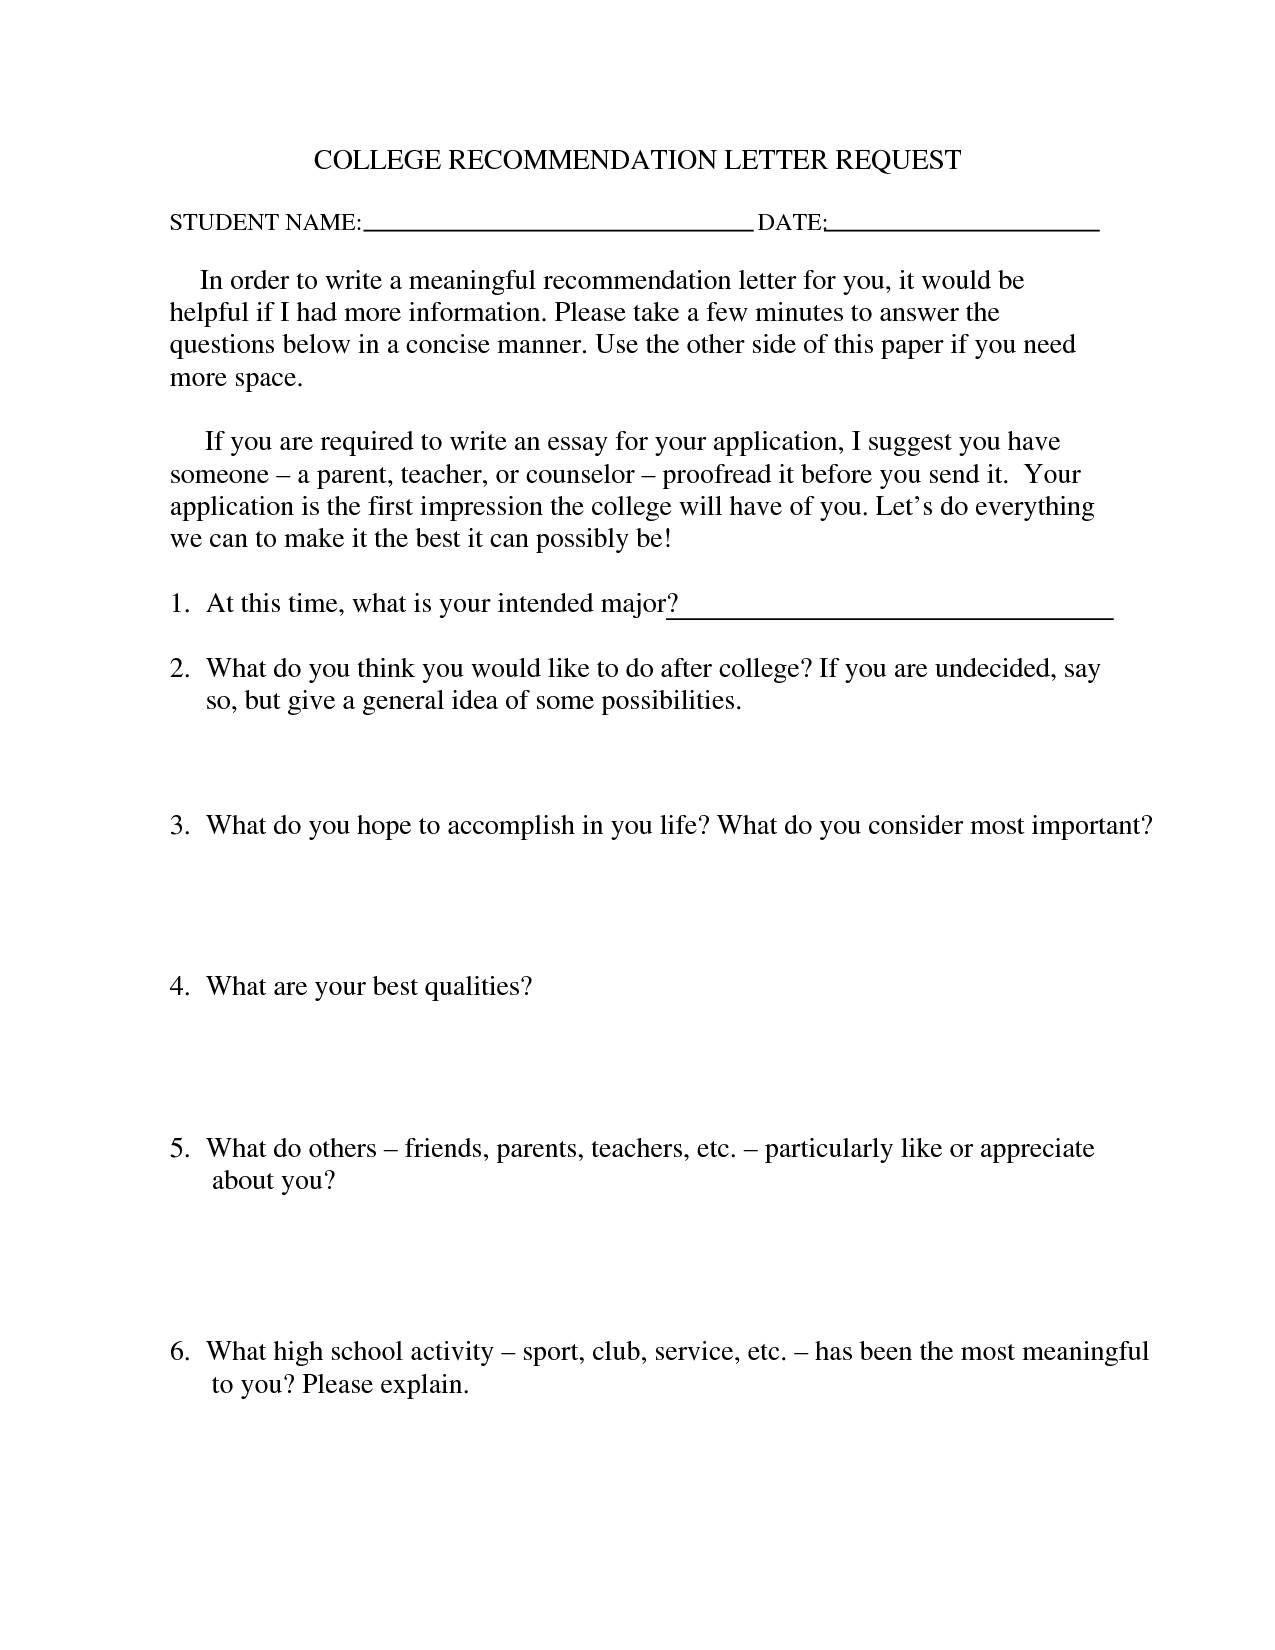 How to write a letter of recommendation for college admissions 